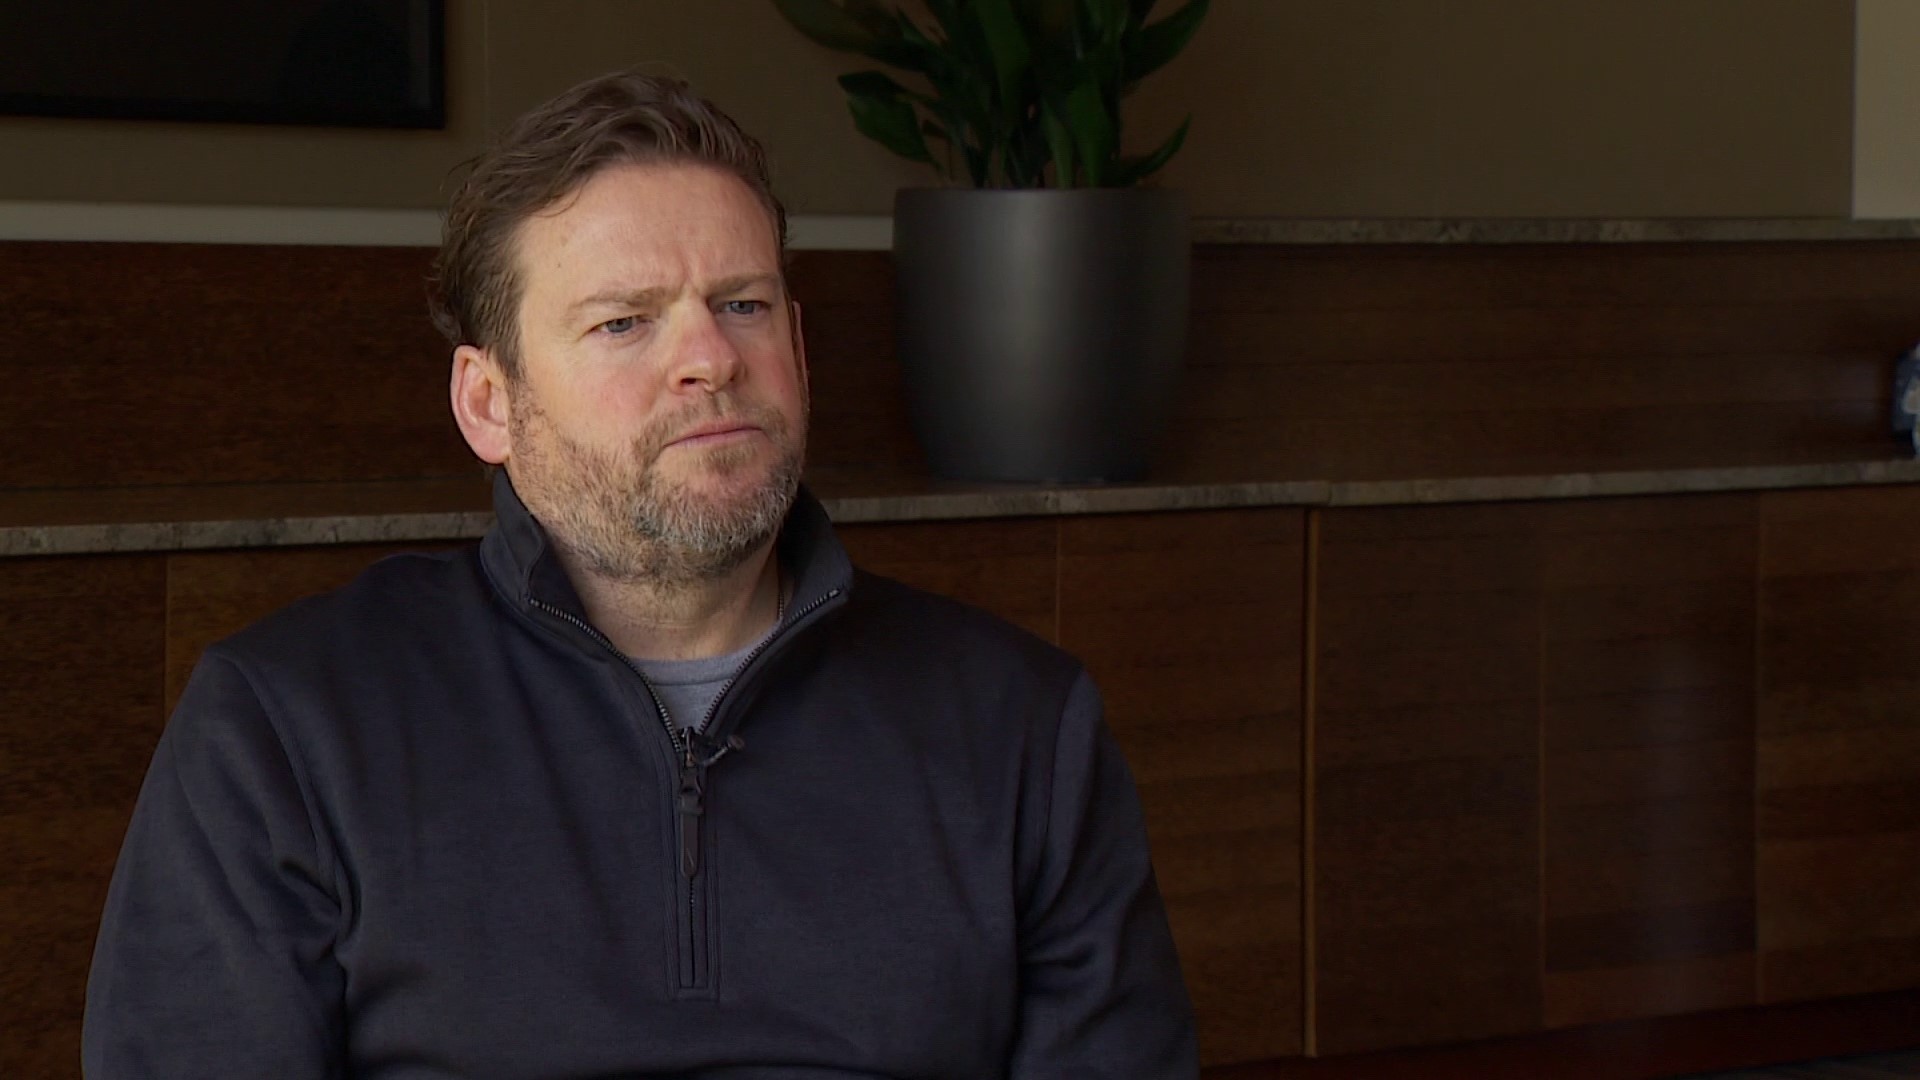 KING 5's Paul Silvi sits down with Seattle Seahawks General Manager John Schneider in a one-on-one interview.